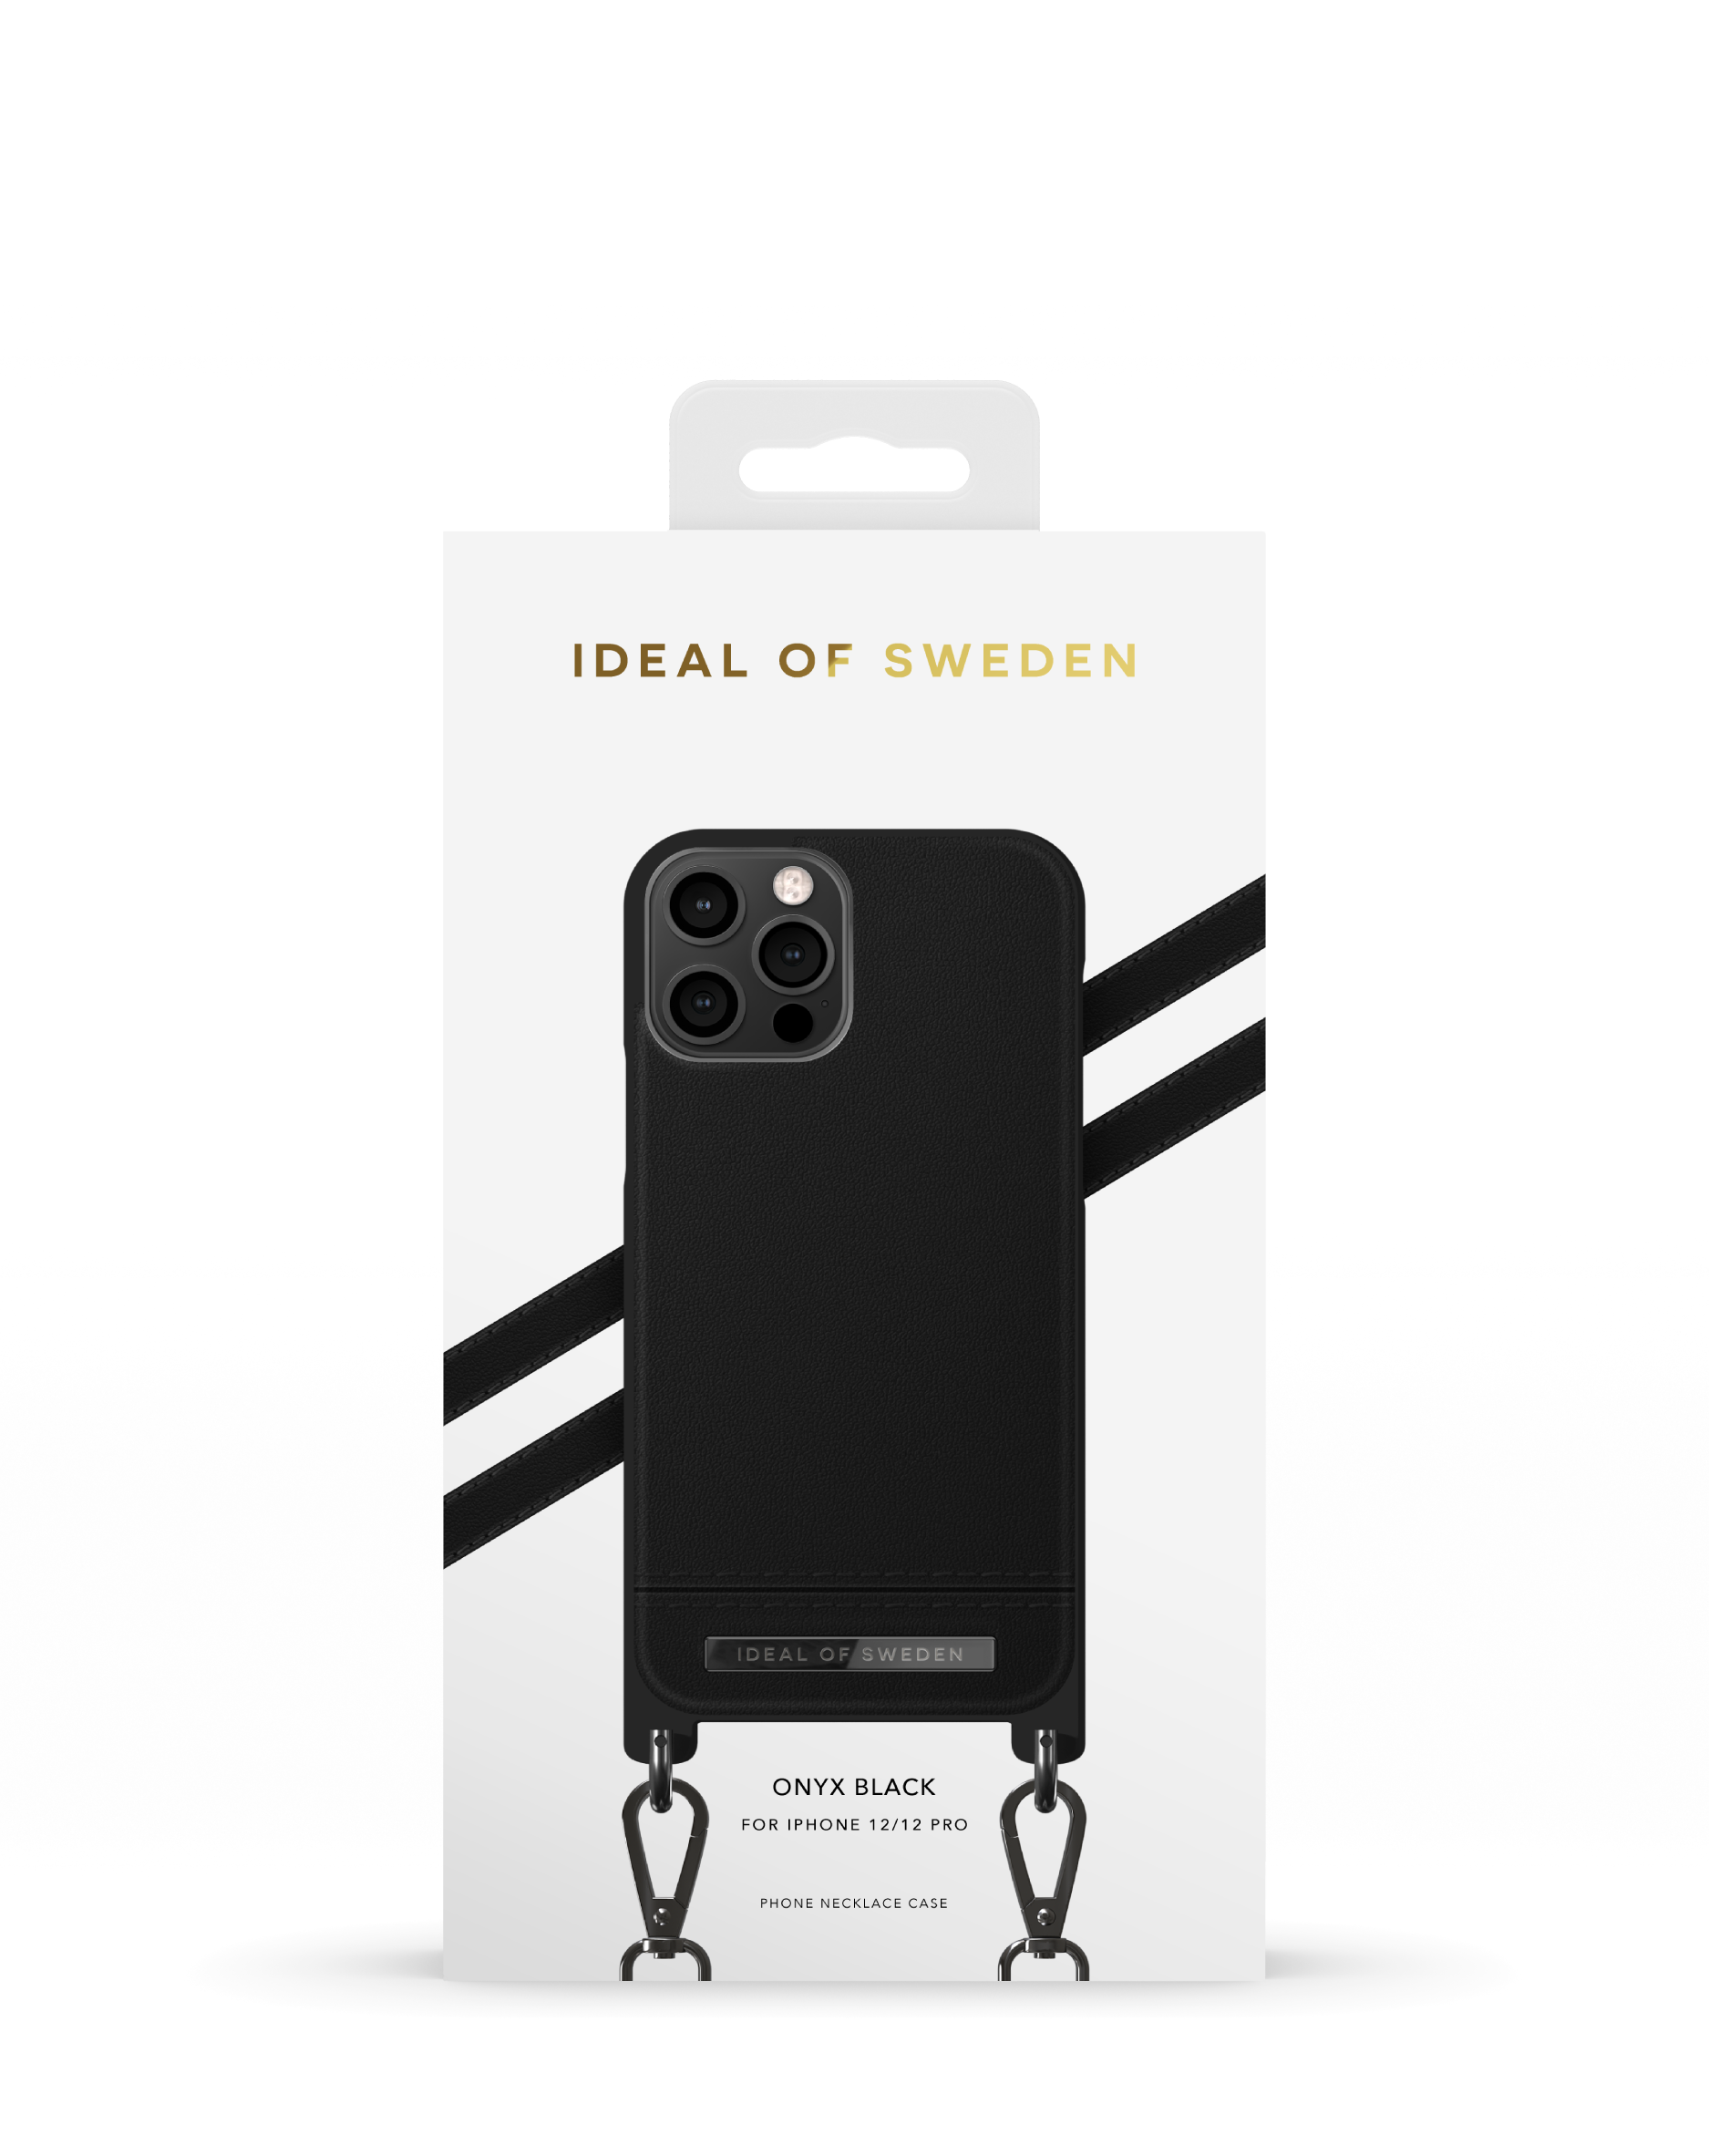 IDACSS21-I2061-292, Apple SWEDEN OF Apple iPhone Apple, 12, iPhone Black IDEAL Onyx Pro, 12 Backcover,